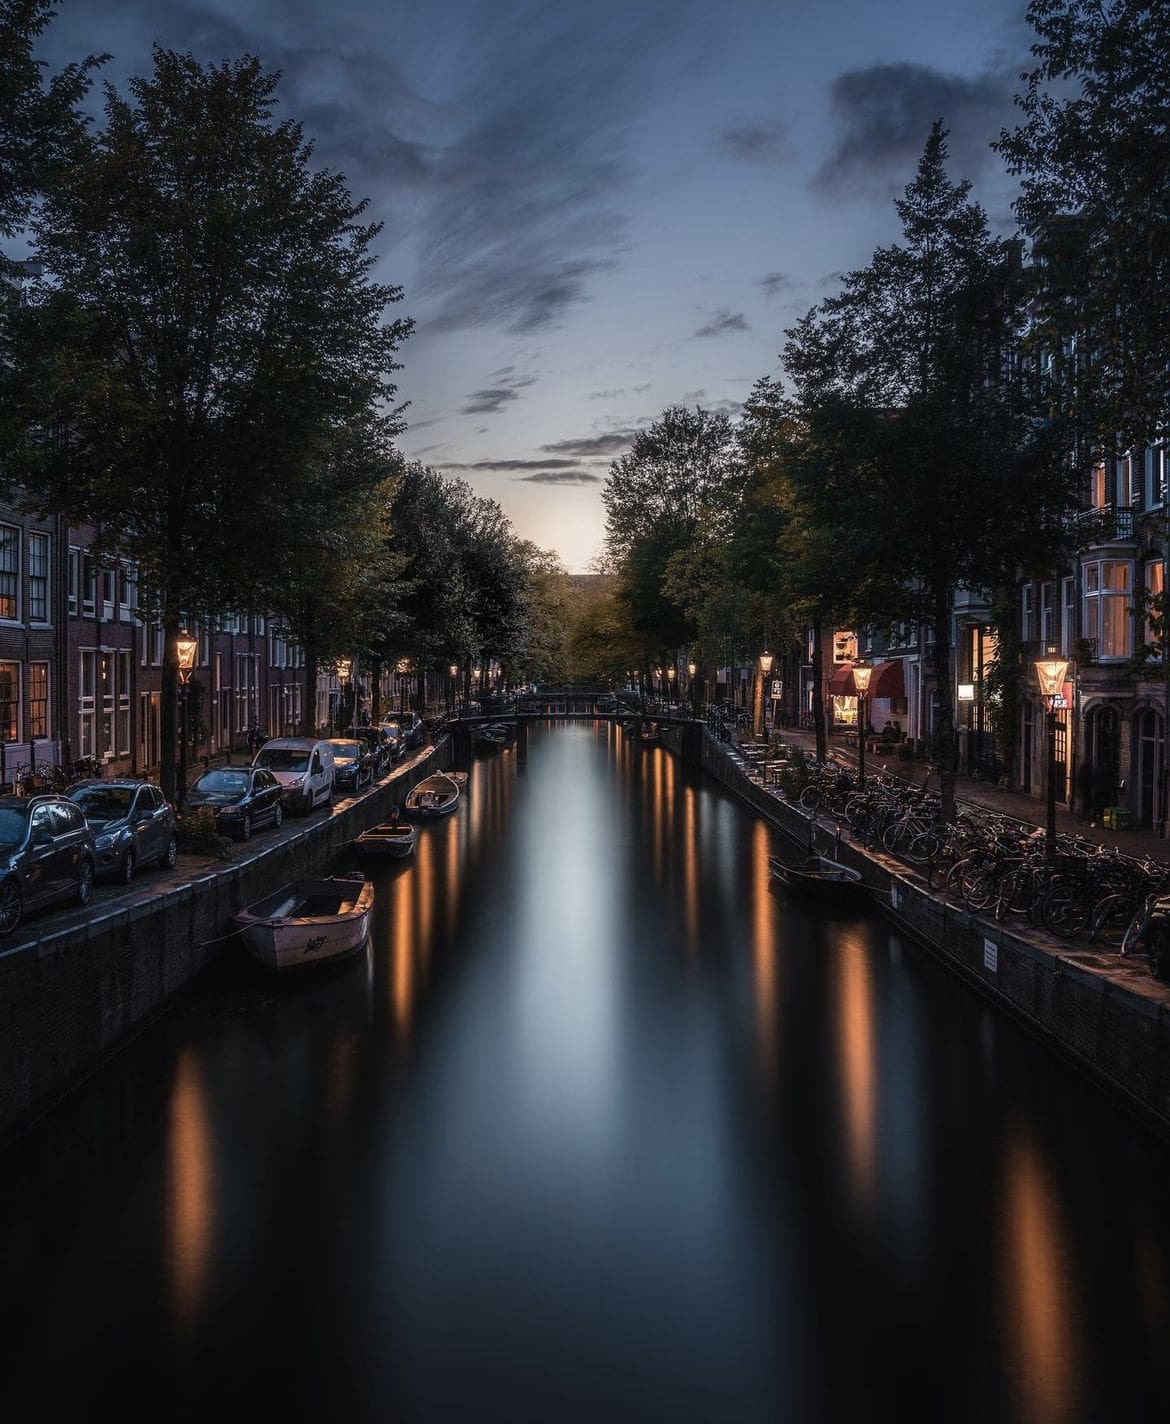 Calm evenings along the canals of Amsterdam - 12 Of The Best City Breaks in Europe